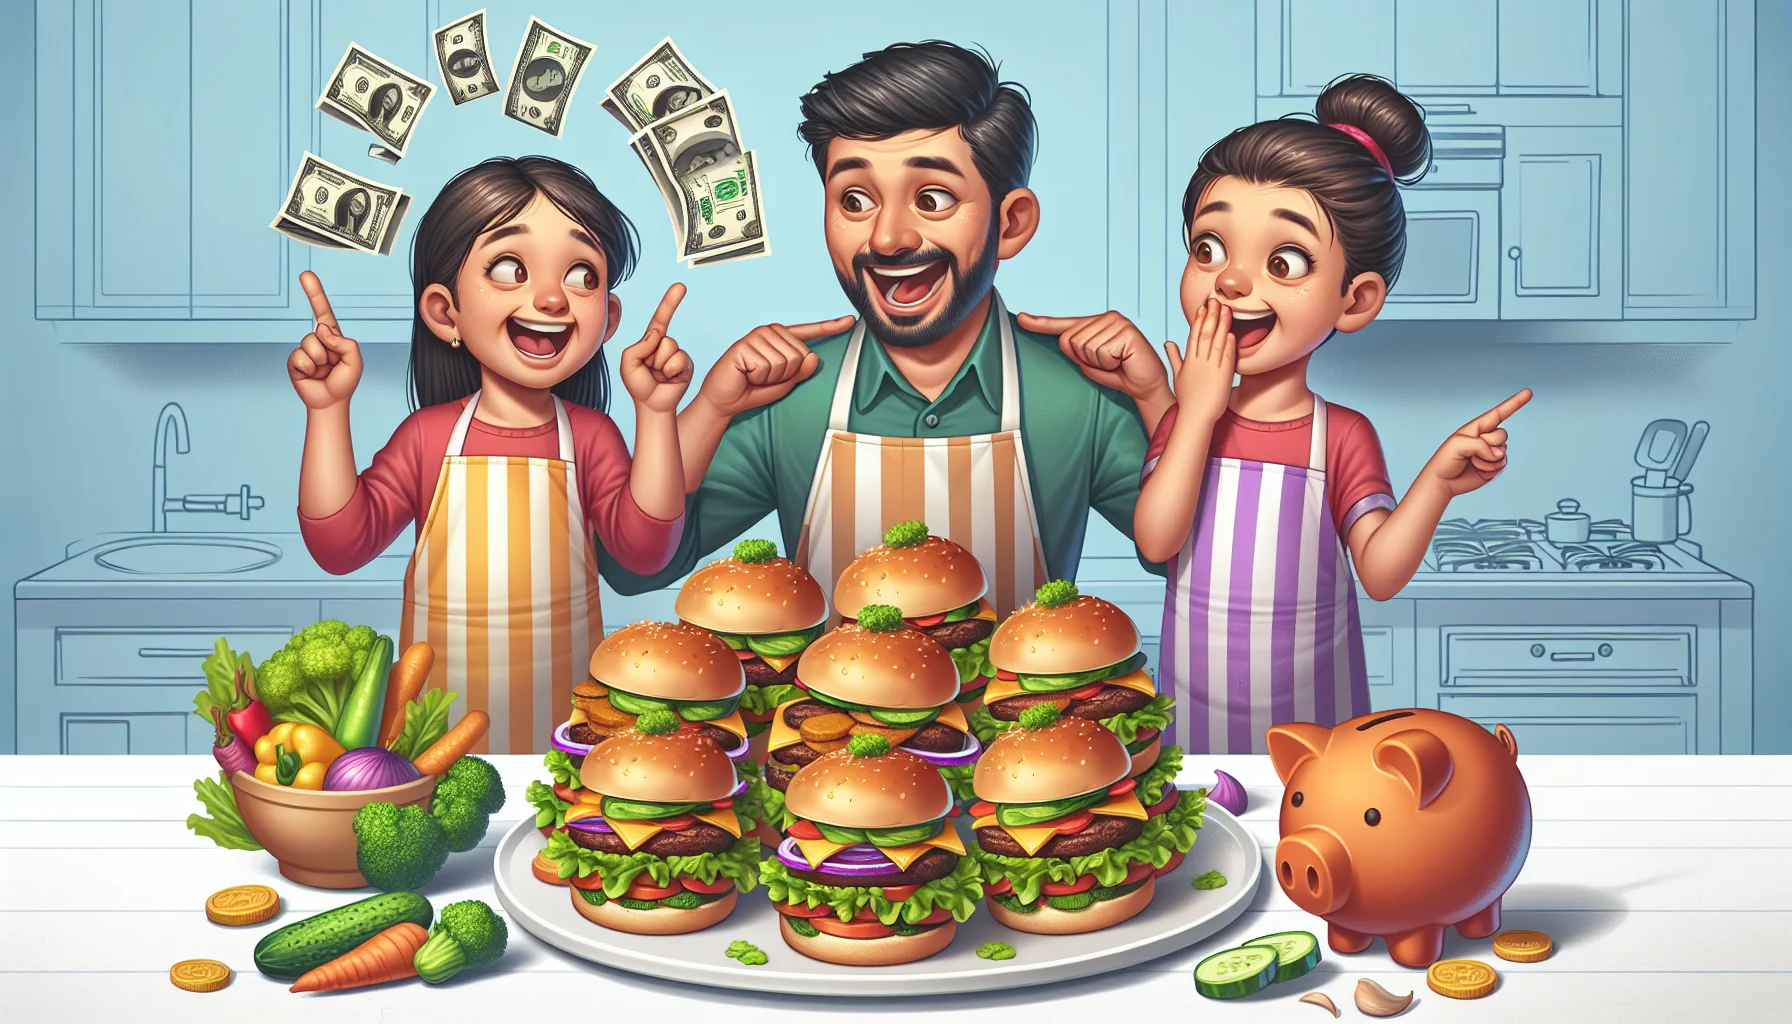 Create an amusing and realistic image signifying Father's Day Slider Recipes. Illustrate mini, juicy burgers with lots of colorful vegetables. Show them arranged on a platter in a playful way mimicking low-cost but nutritional food items. Perhaps they can be shaped like dollar bills or piggy banks. Have a father and kid, possibly a Middle-Eastern daughter and a South Asian dad, both wearing aprons and playfully arguing about who makes the best sliders: the ones that are both tastier and healthier.